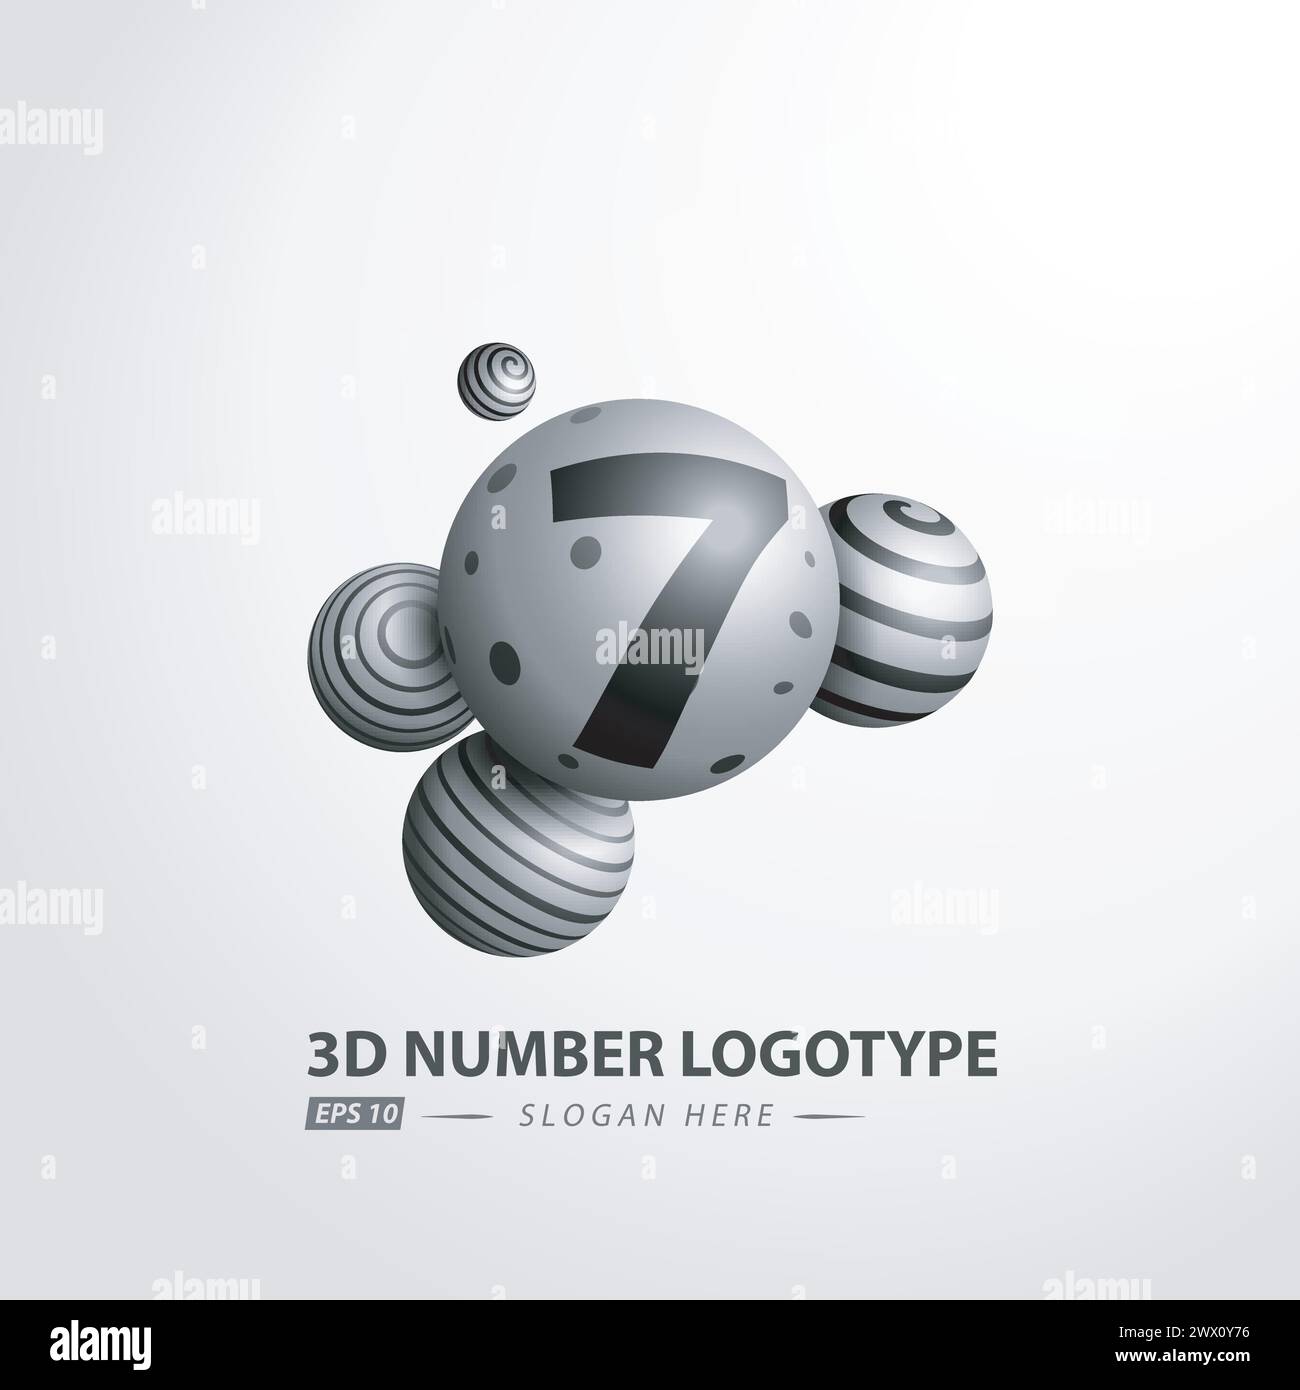 Number Decorative Ball Logotype 3D, Vector Illustration Stock Vector